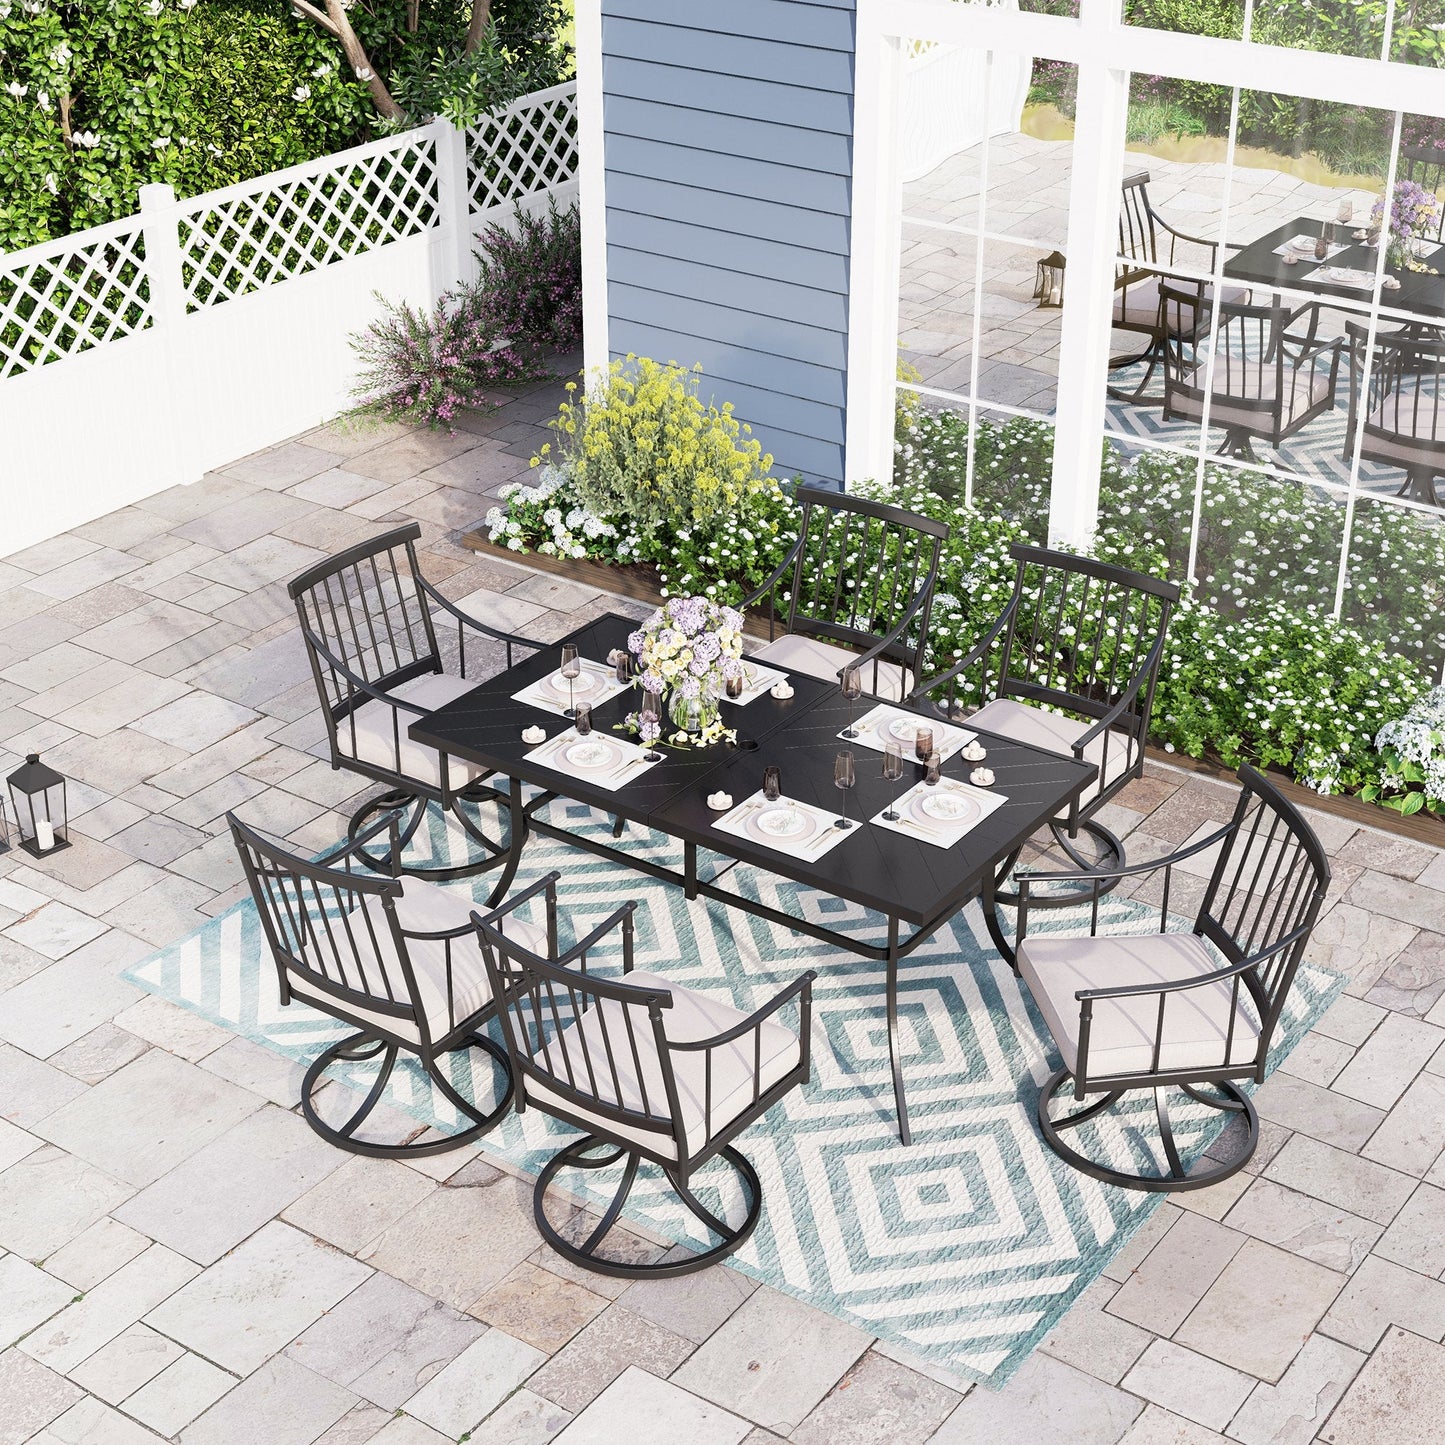 Sophia & William 7-Piece Metal Patio Dining Set Swivel Chairs and Rectangular table Set